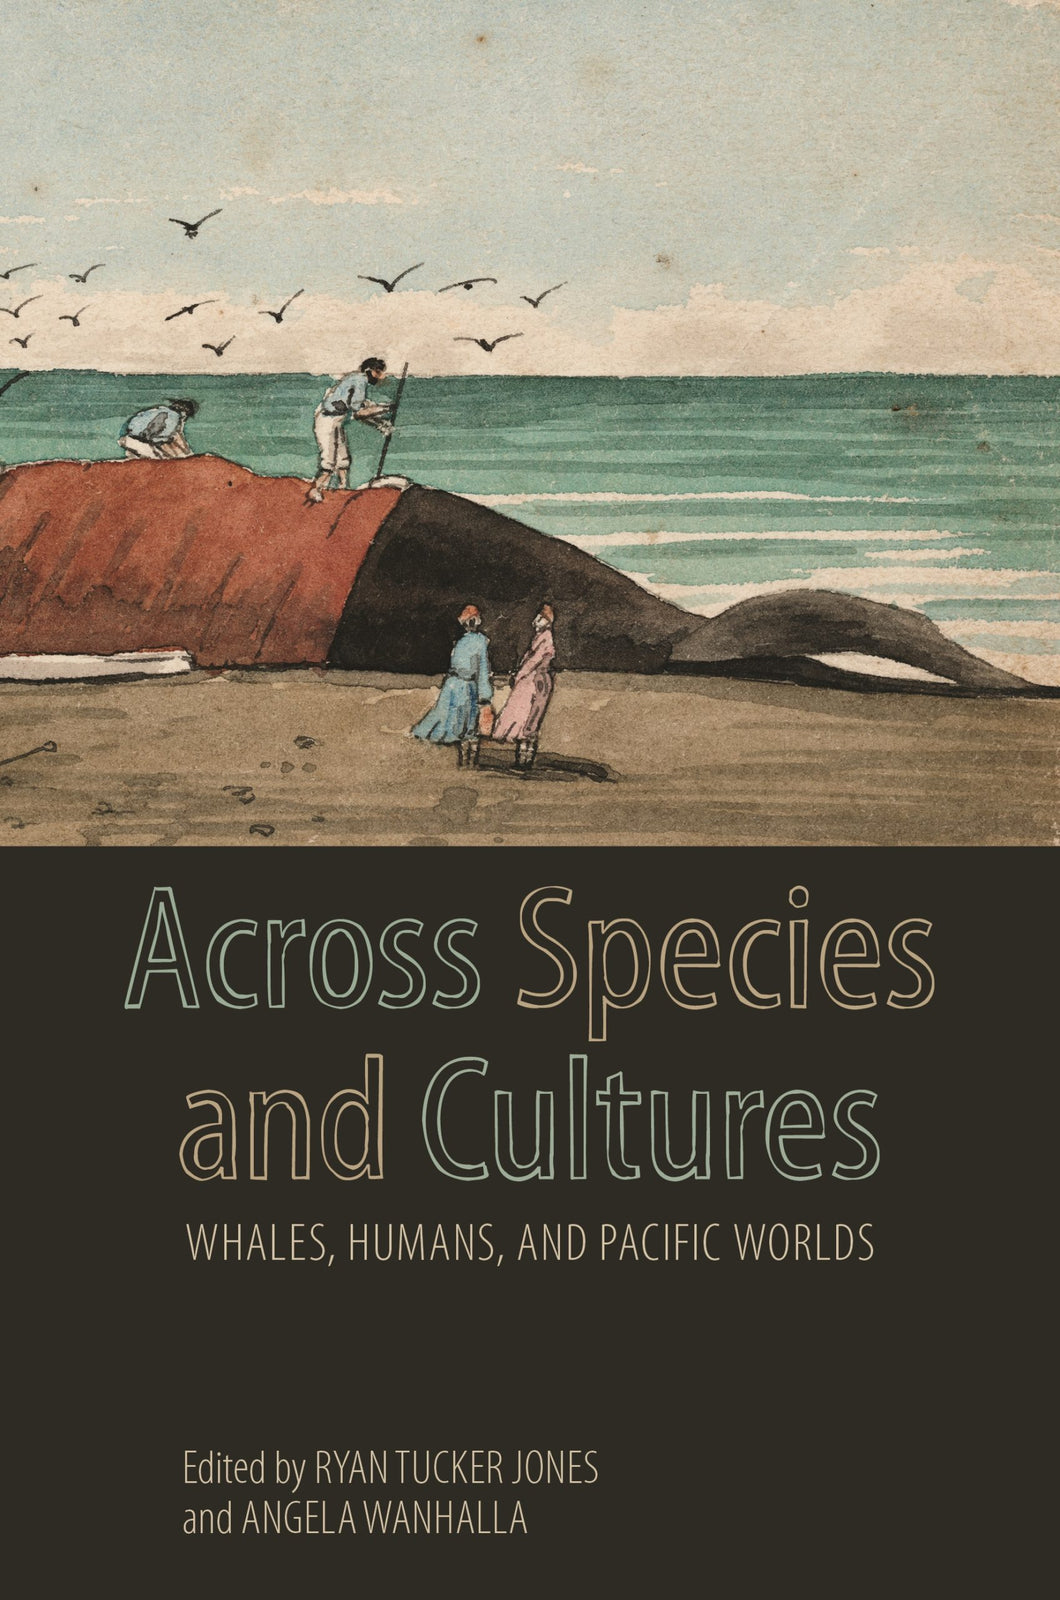 Across Species and Cultures Edited by Ryan Tucker Jones and Angela Wanhalla